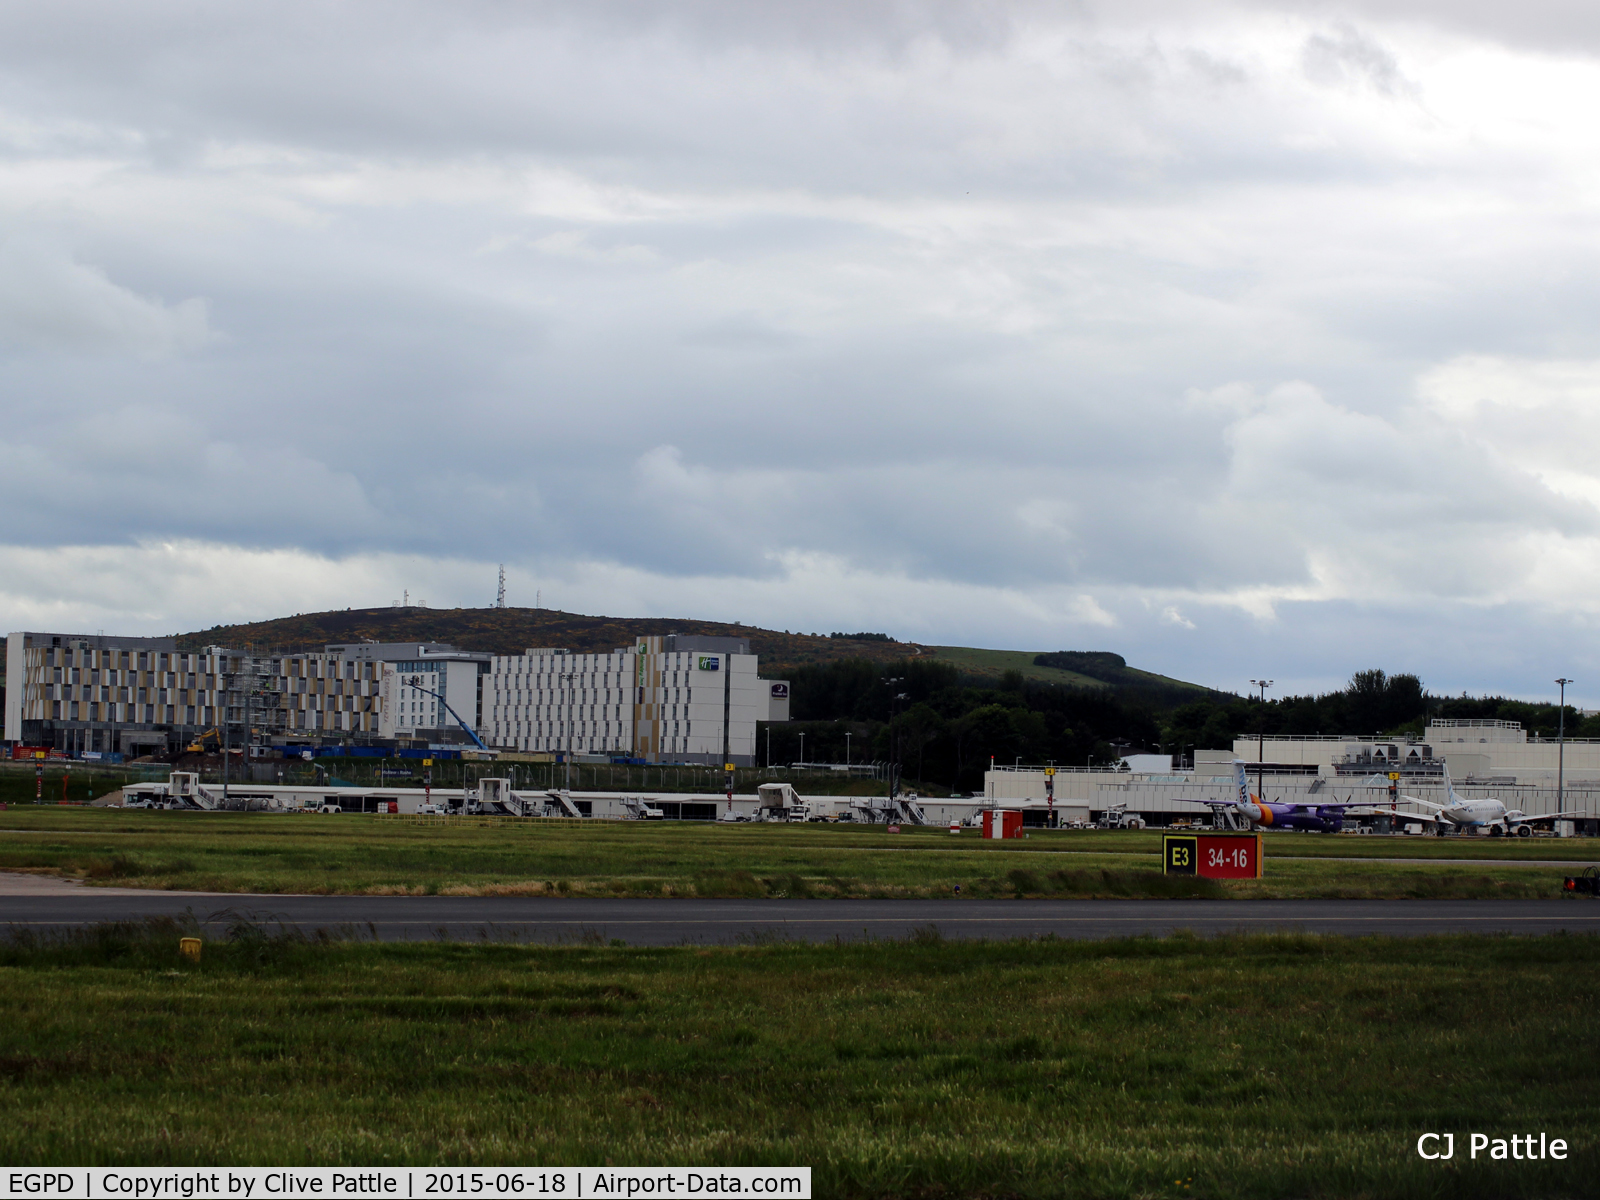 Aberdeen Airport, Aberdeen, Scotland United Kingdom (EGPD) - New Hotels and Industrial units now fill the horizon on the west side of Aberdeen, Scotland EGPD. Must check out the rooms for spotting opportunities.